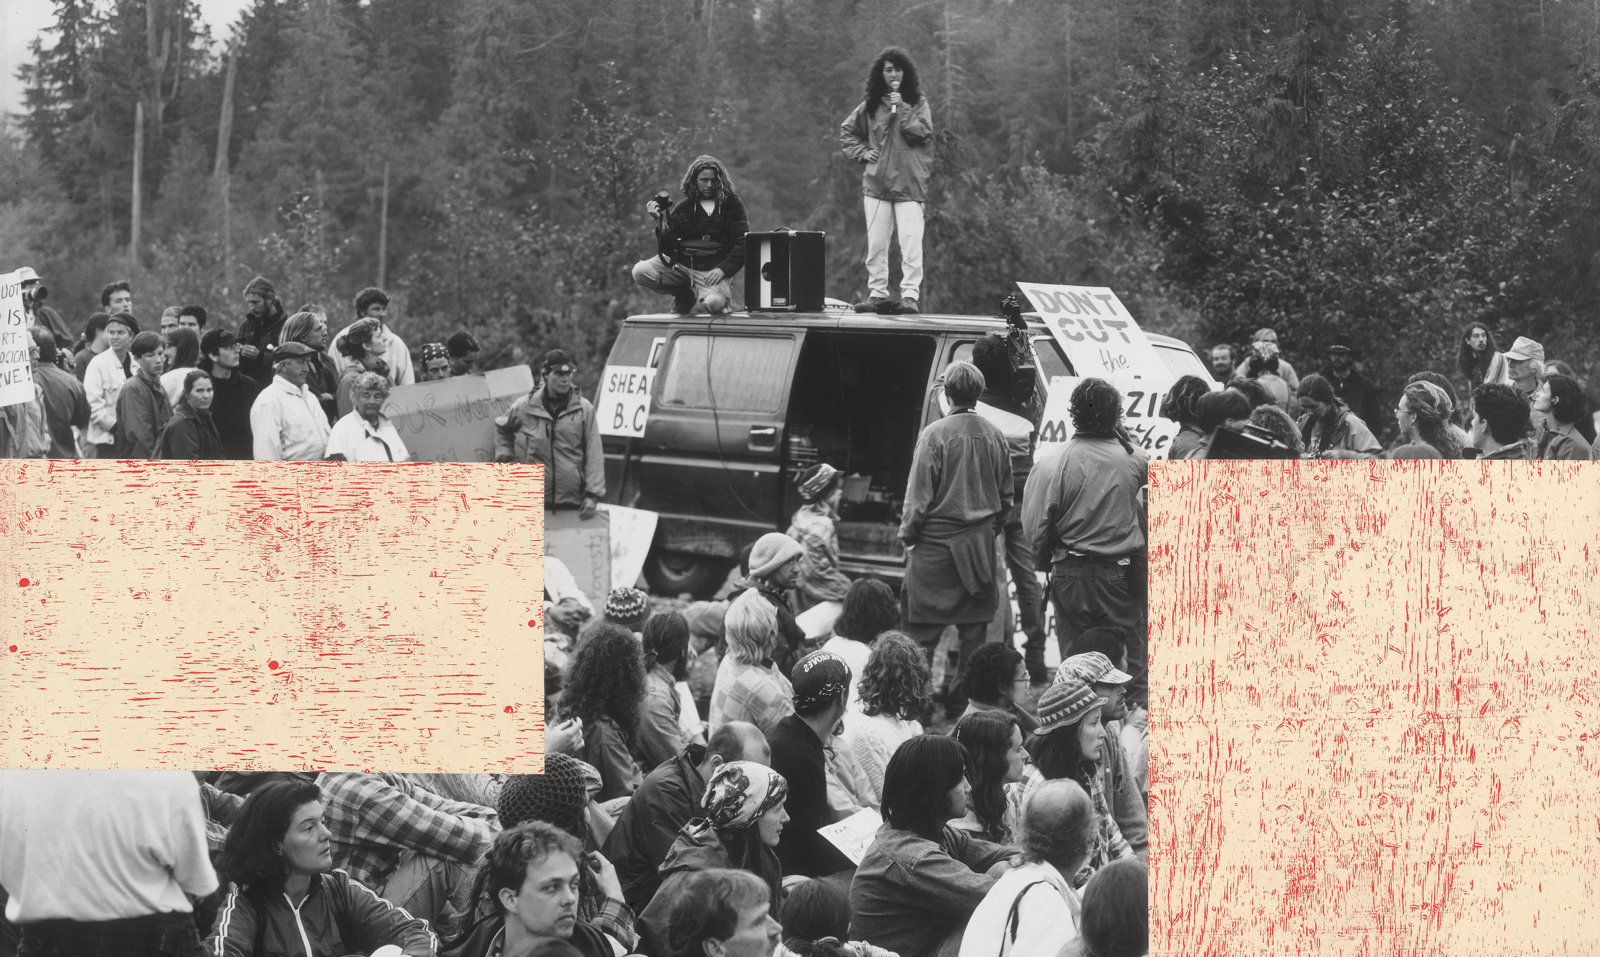 Ian Wallace, Clayoquot Protest (August 9, 1993) VII, 1993–1995, photolaminate with acrylic on canvas, 72 x 120 x 1 in. (184 x 305 x 4 cm)